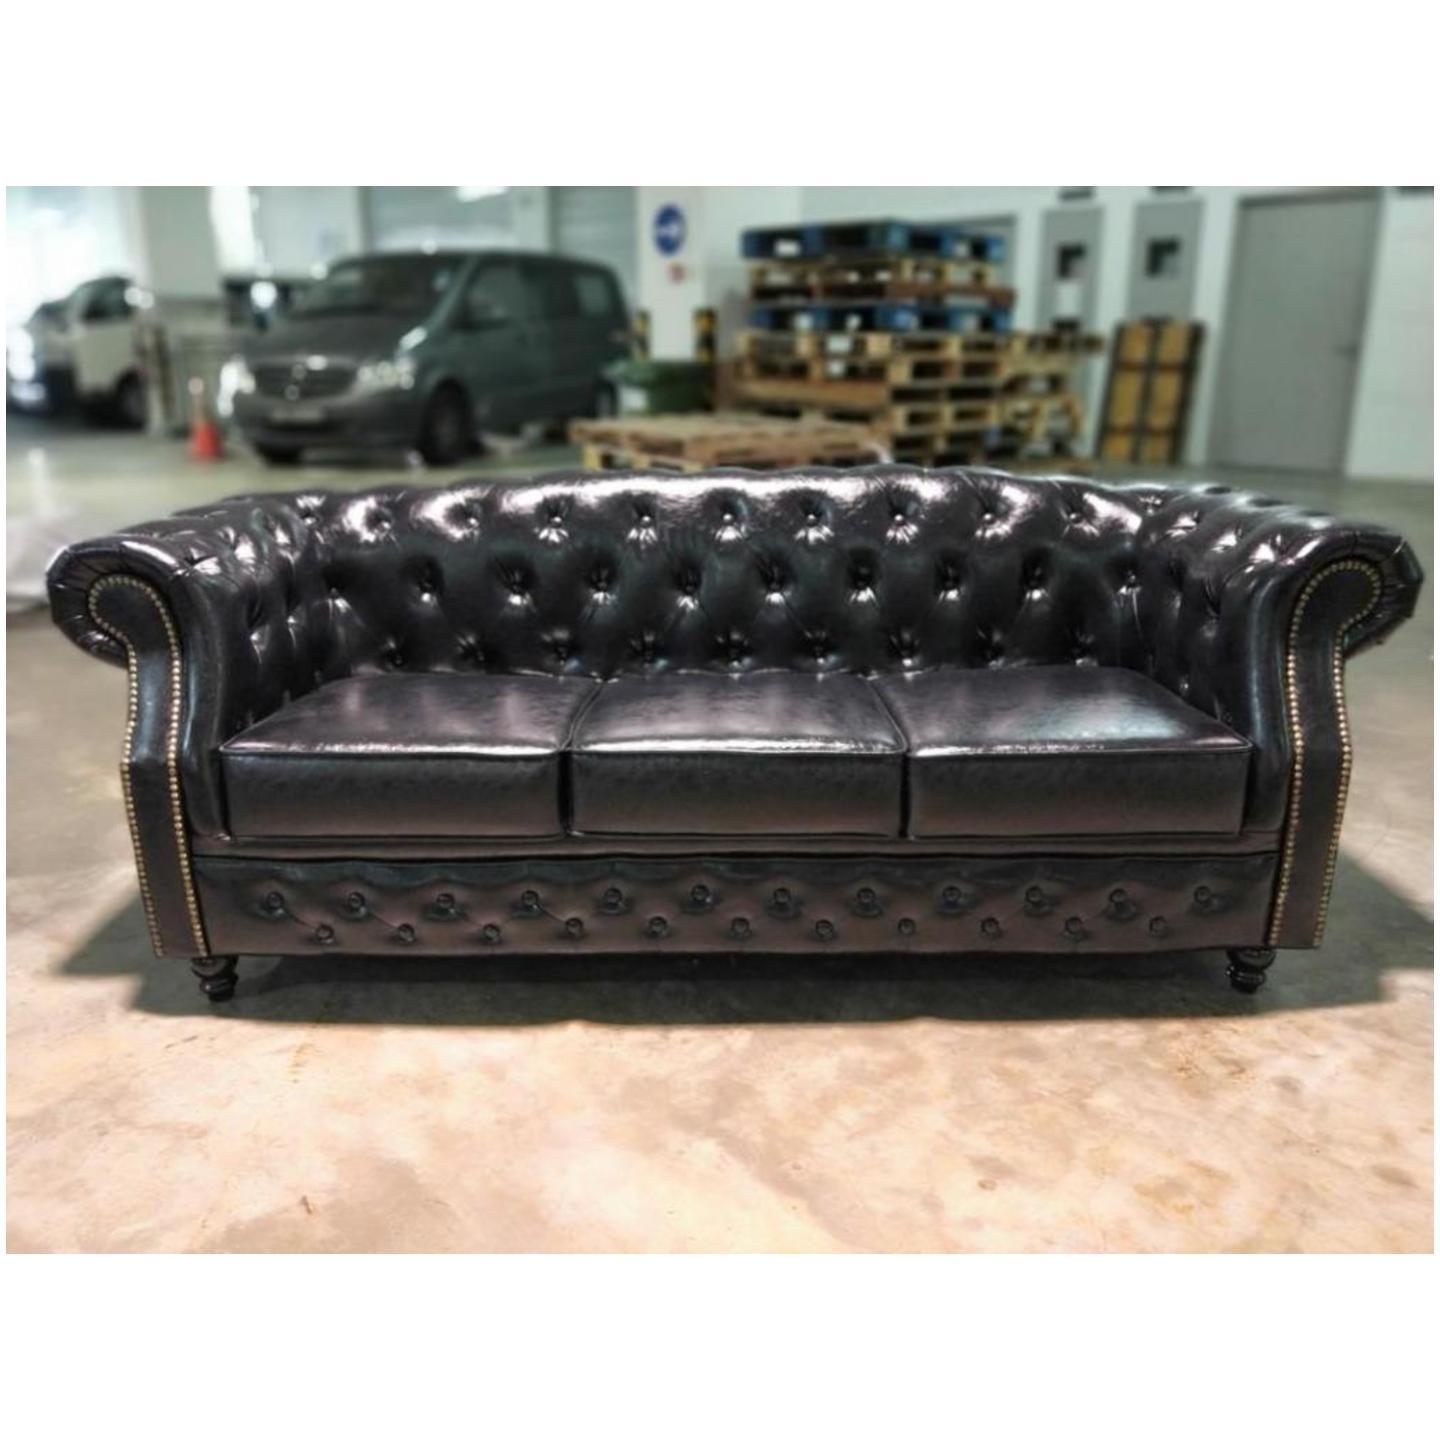 (PRE ORDER) BOTTEVA 3 Seater Chesterfield Sofa in GLOSS BLACK PU - Estimated Delivery in End August 2022